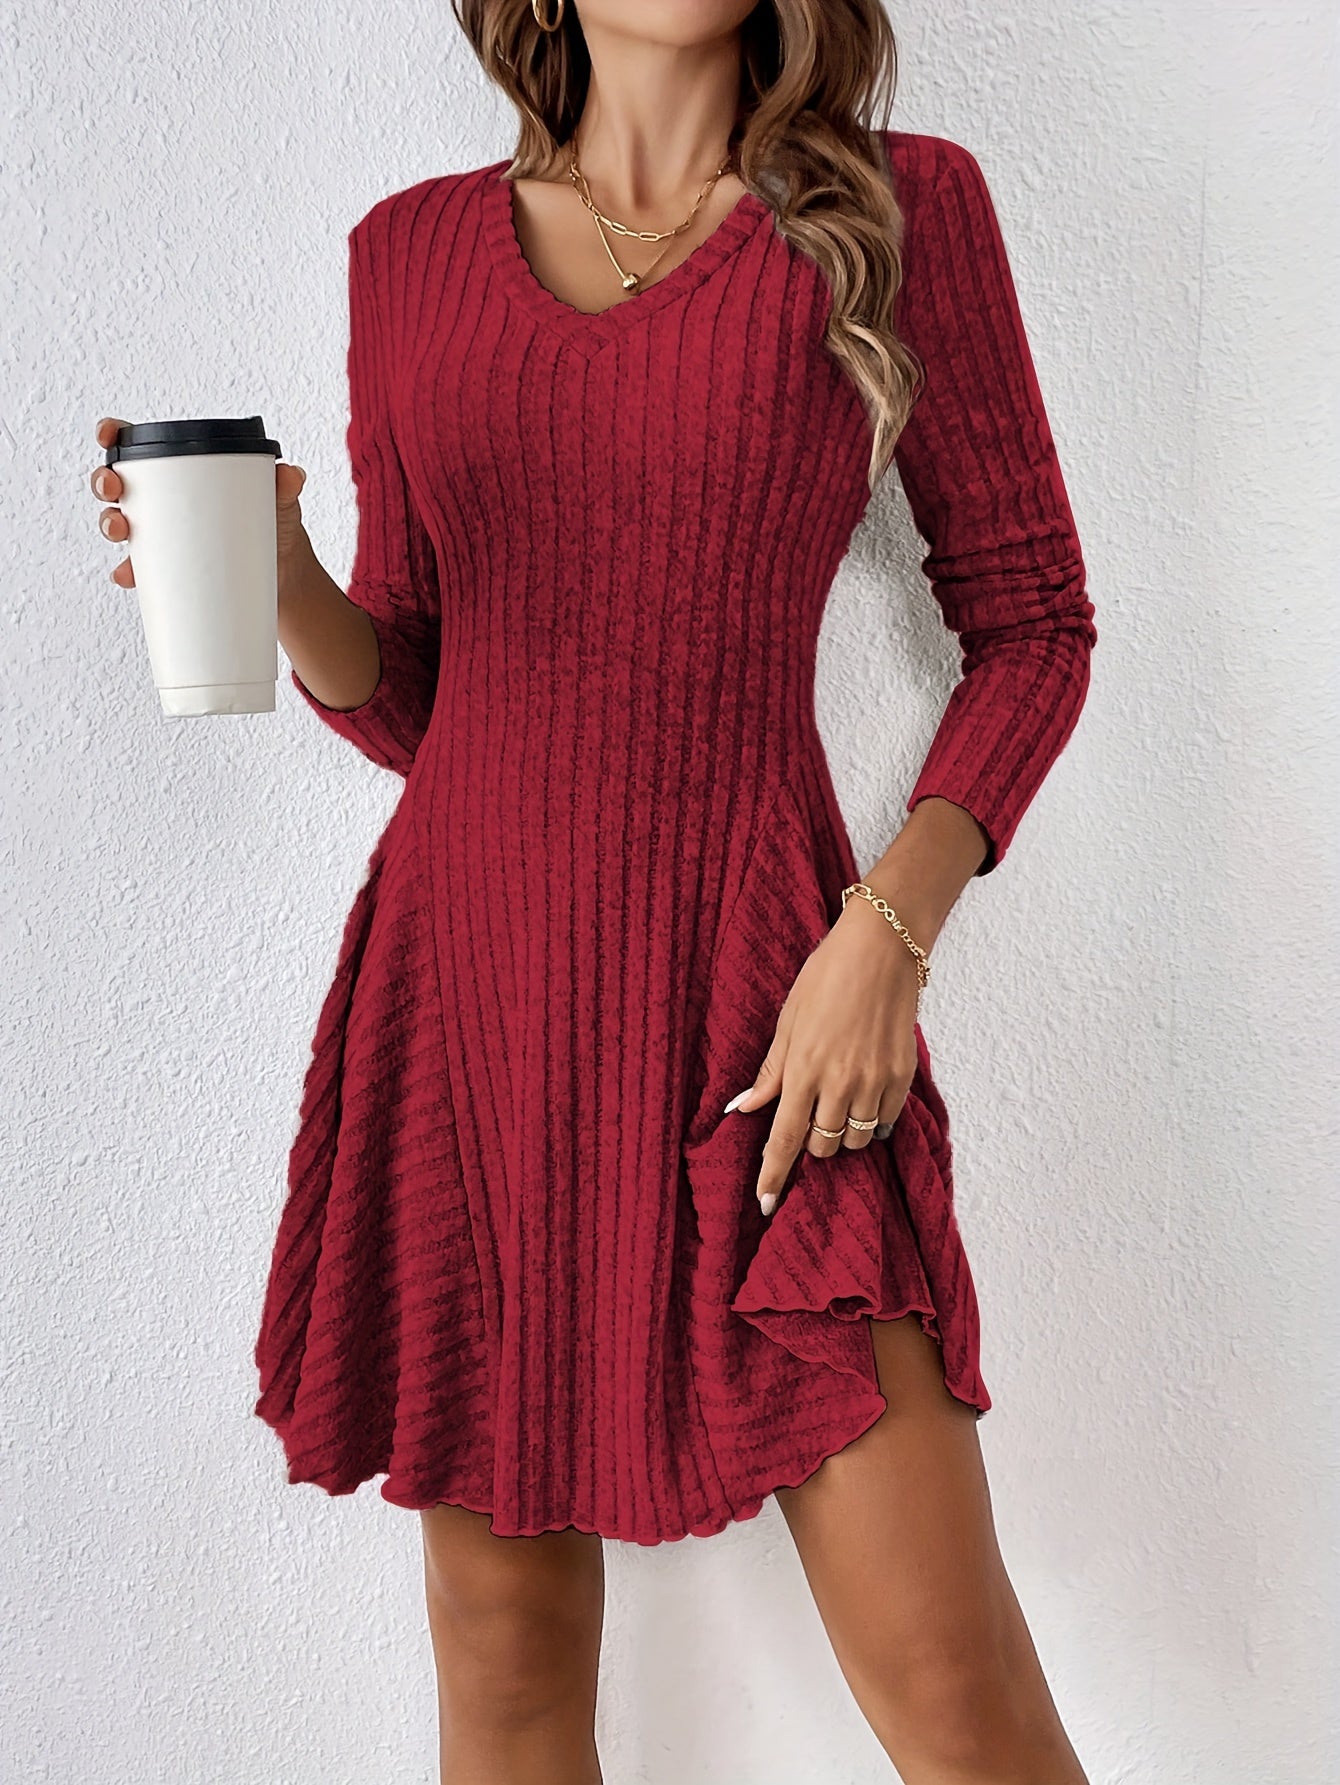 vlovelaw  Solid Ribbed V Neck Dress, Casual Long Sleeve A-line Dress, Women's Clothing